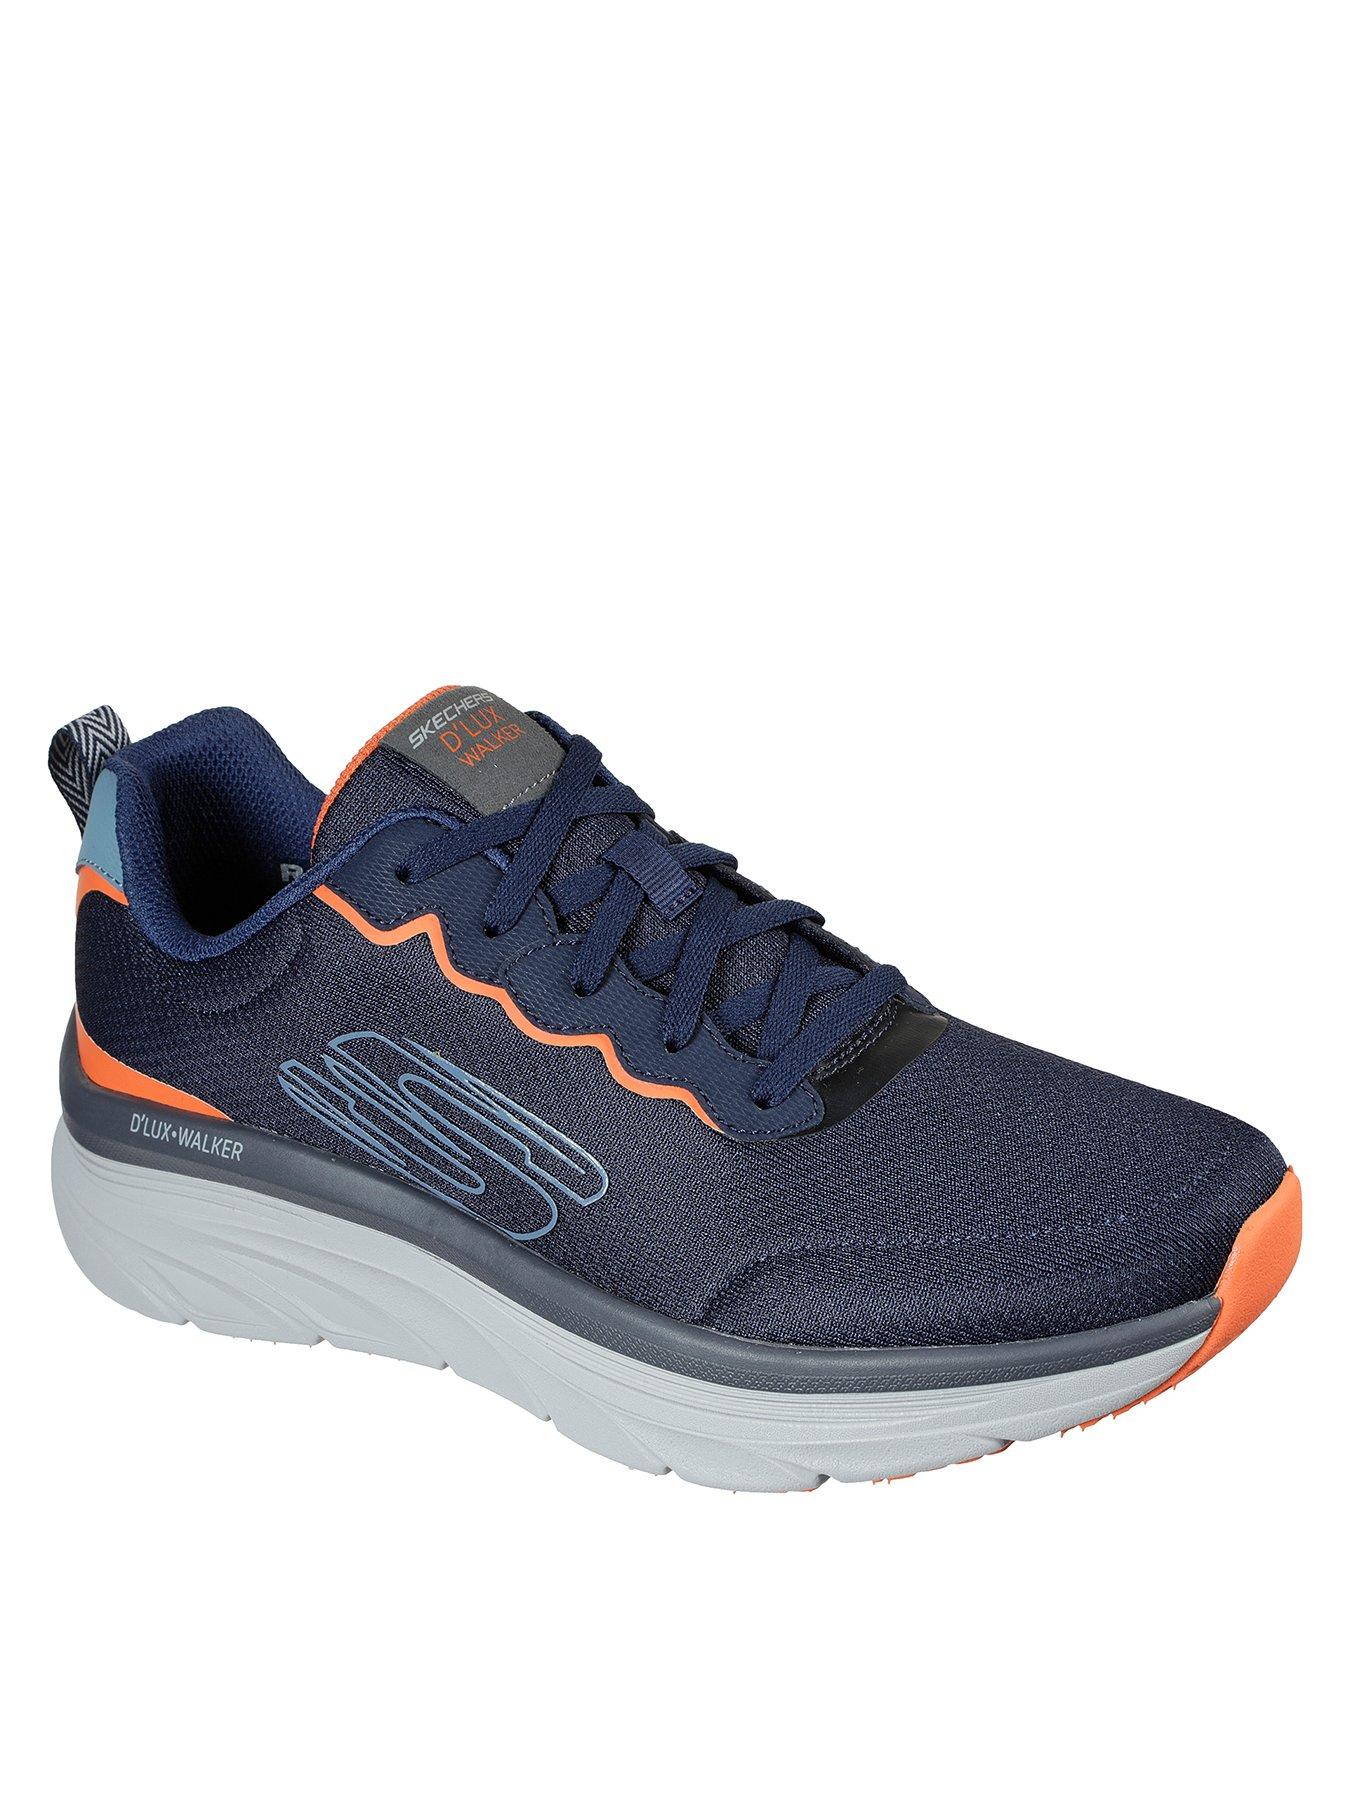 Kansen Mentaliteit verfrommeld Skechers D'Lux Walker Relaxed Fit Mesh Laced Air-Cooled Memory Foam Trainer  - Navy | very.co.uk